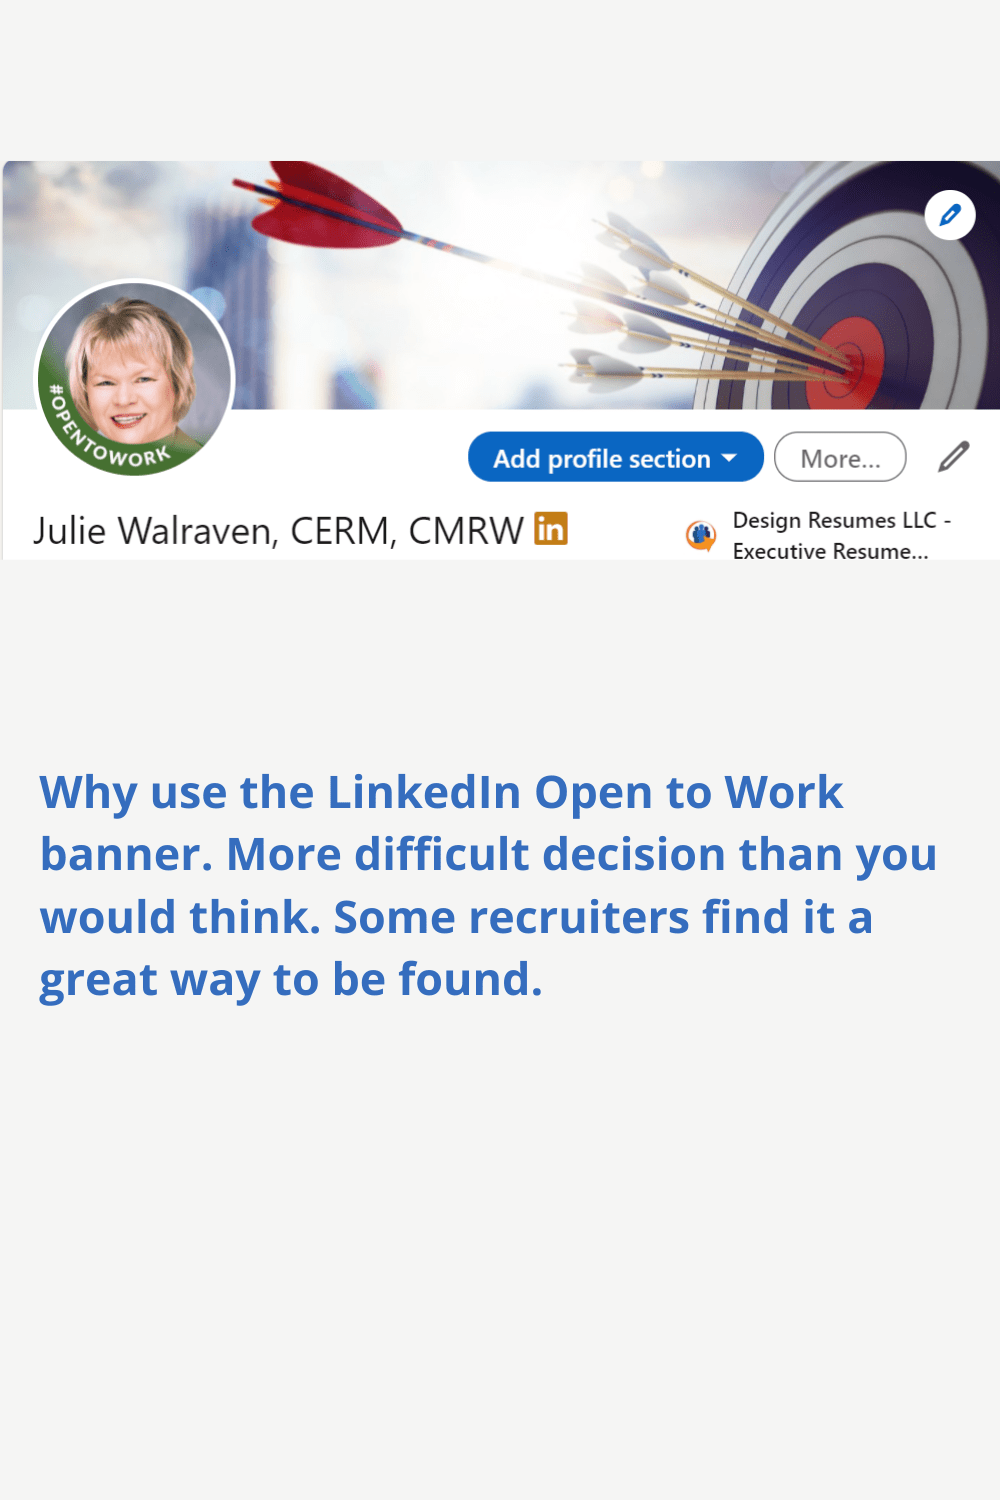 Should I use the LinkedIn Open to Work banner?